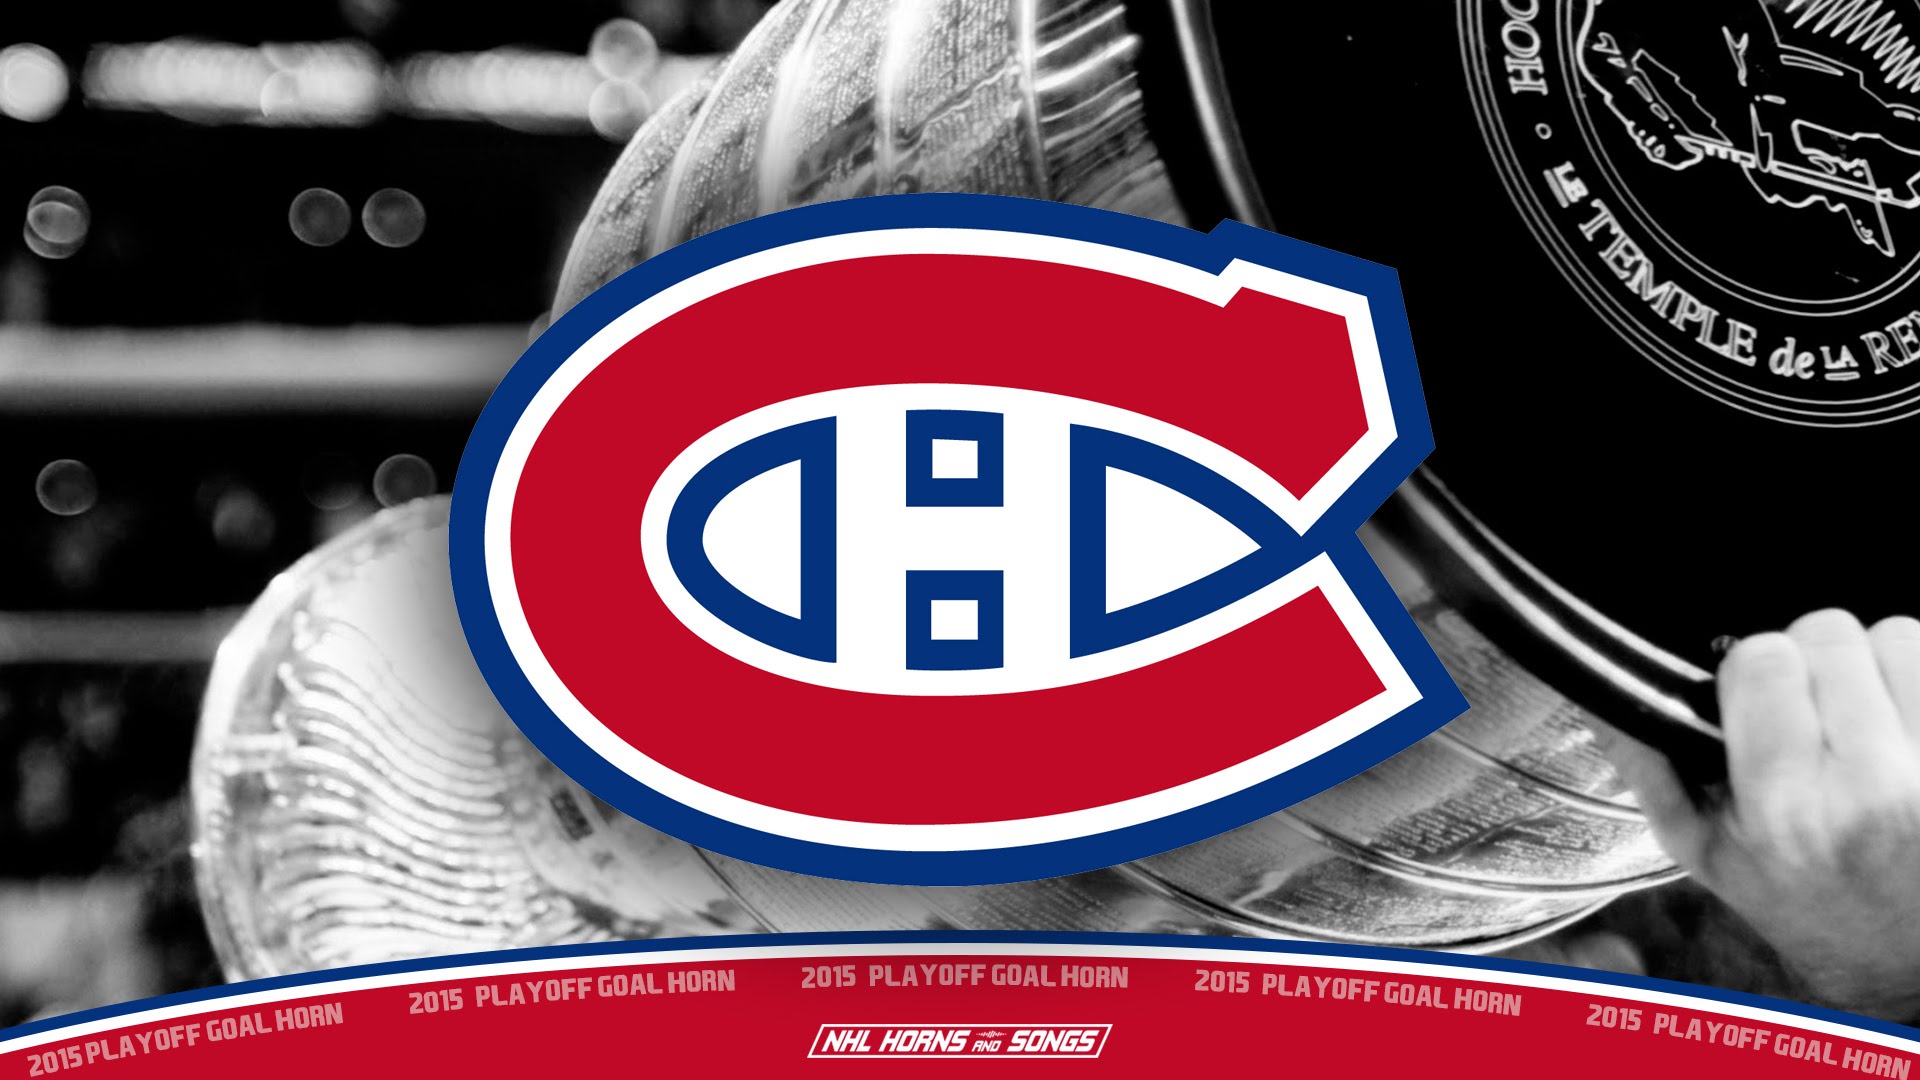 Amazing Montreal Canadiens Pictures & Backgrounds